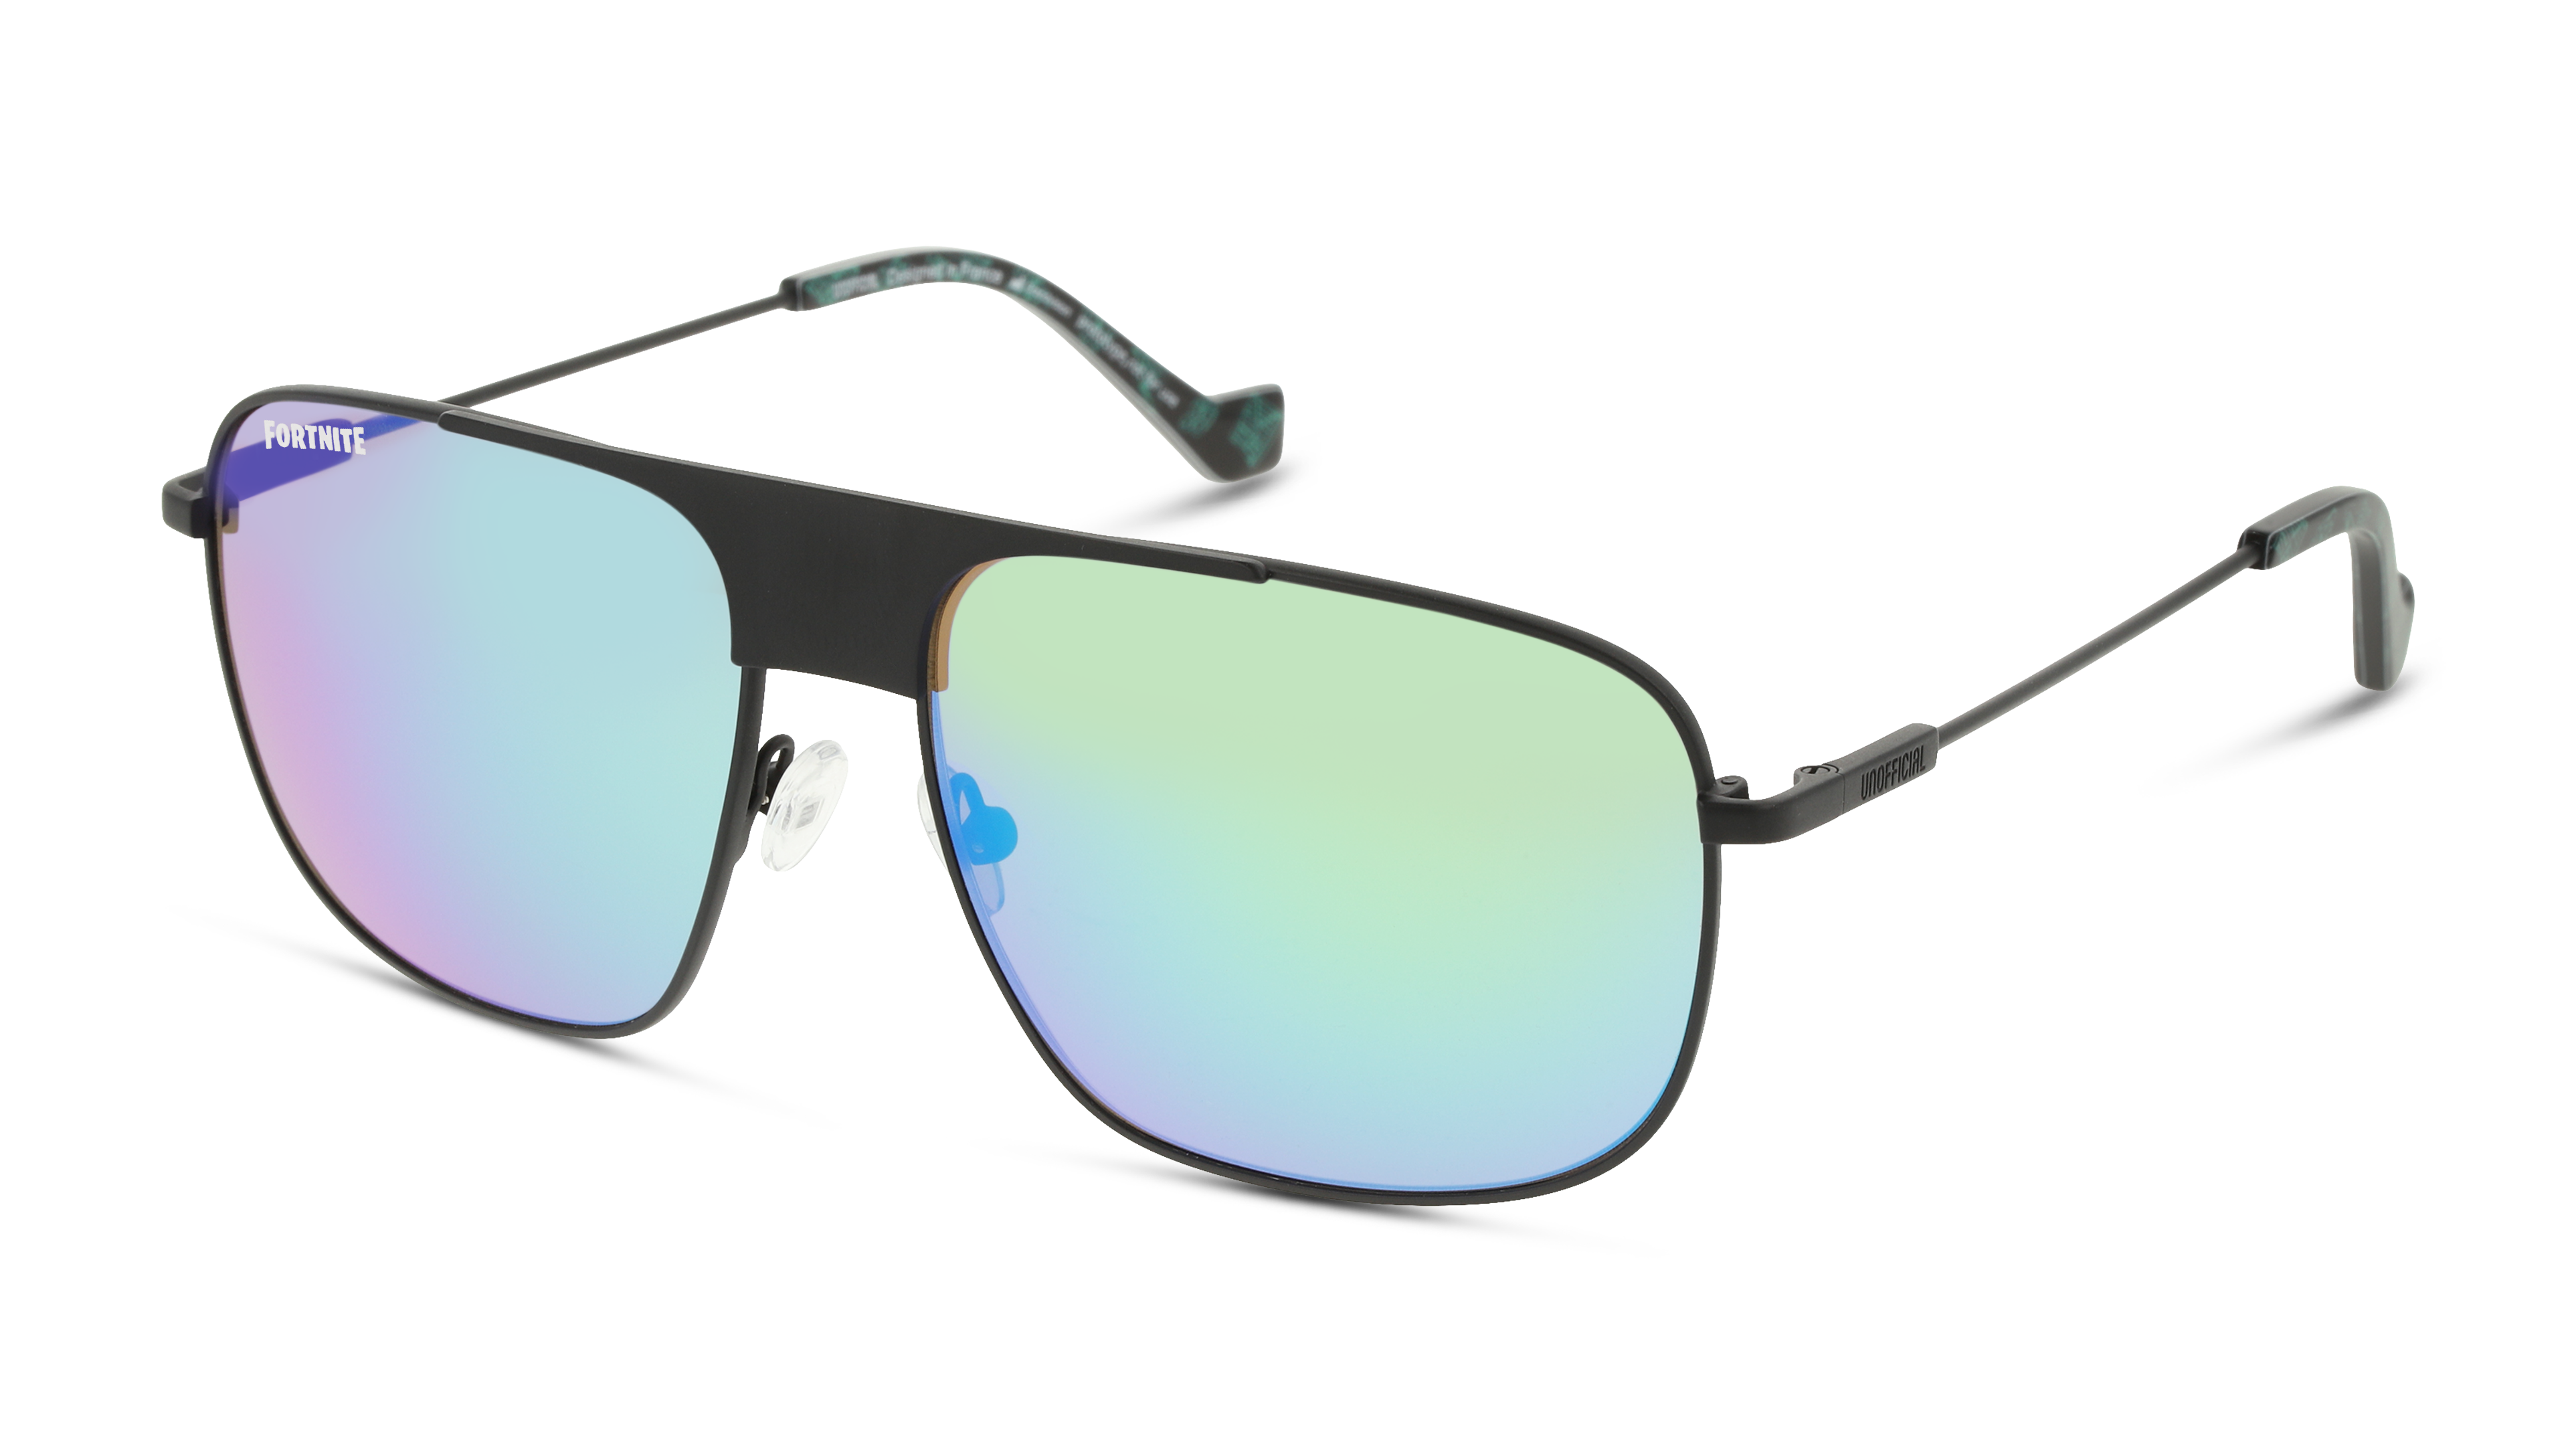 Angle_Left01 Fortnite with Unofficial UNSU0153 (BBEE) Sunglasses Green / Black